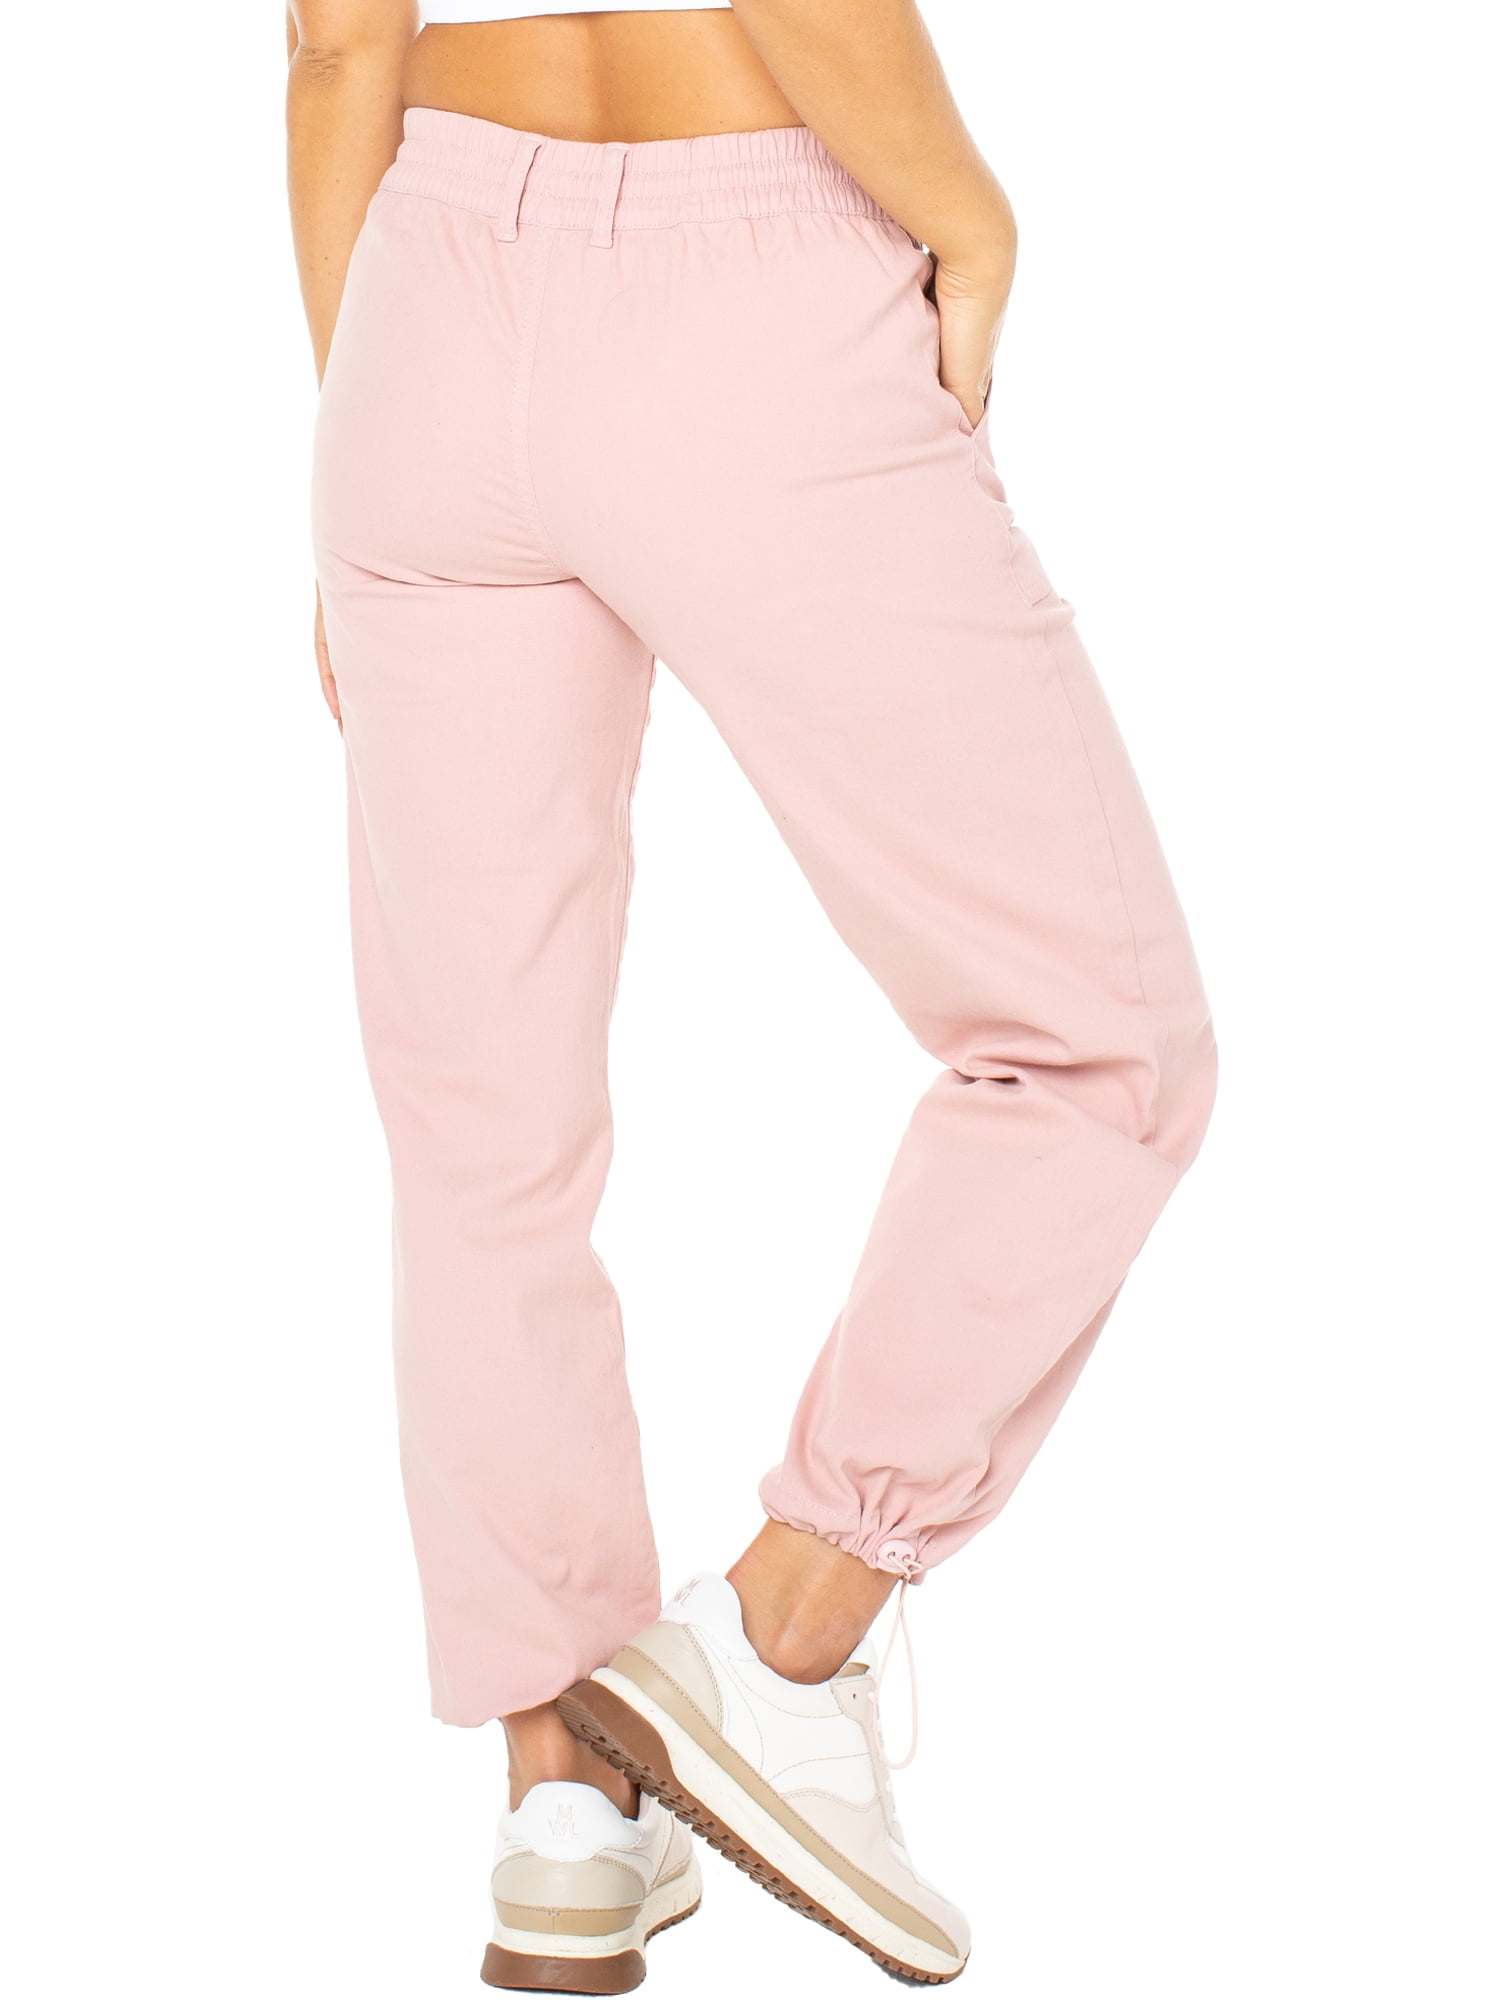 Jessica London Women's Plus Size Soft Ease Pant - 22/24, Pink : Target